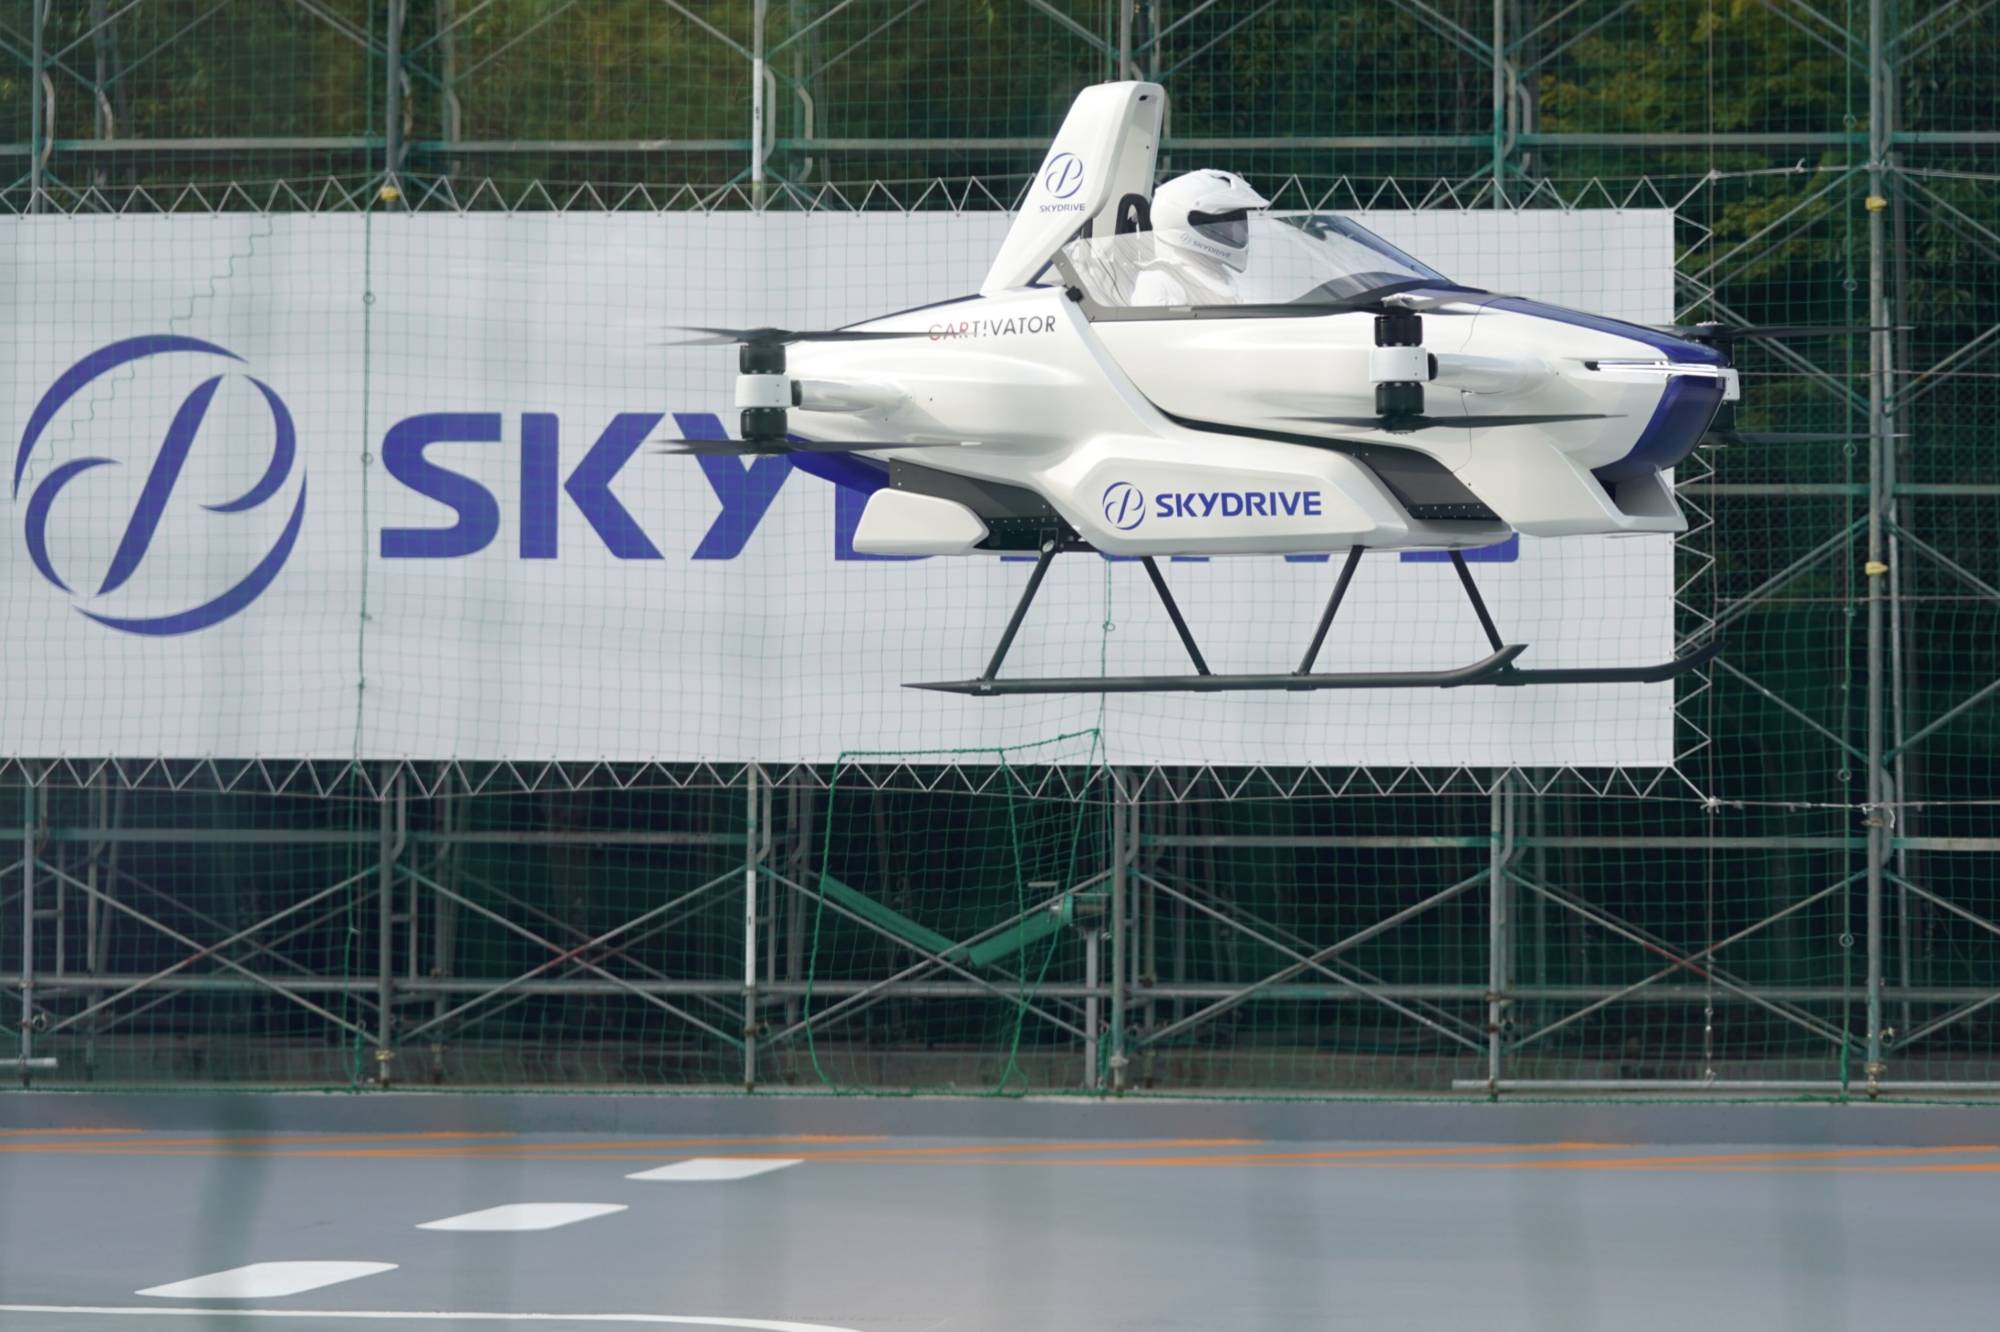 Suzuki and SkyDrive to jointly start producing flying cars in 2024 | The Japan Times